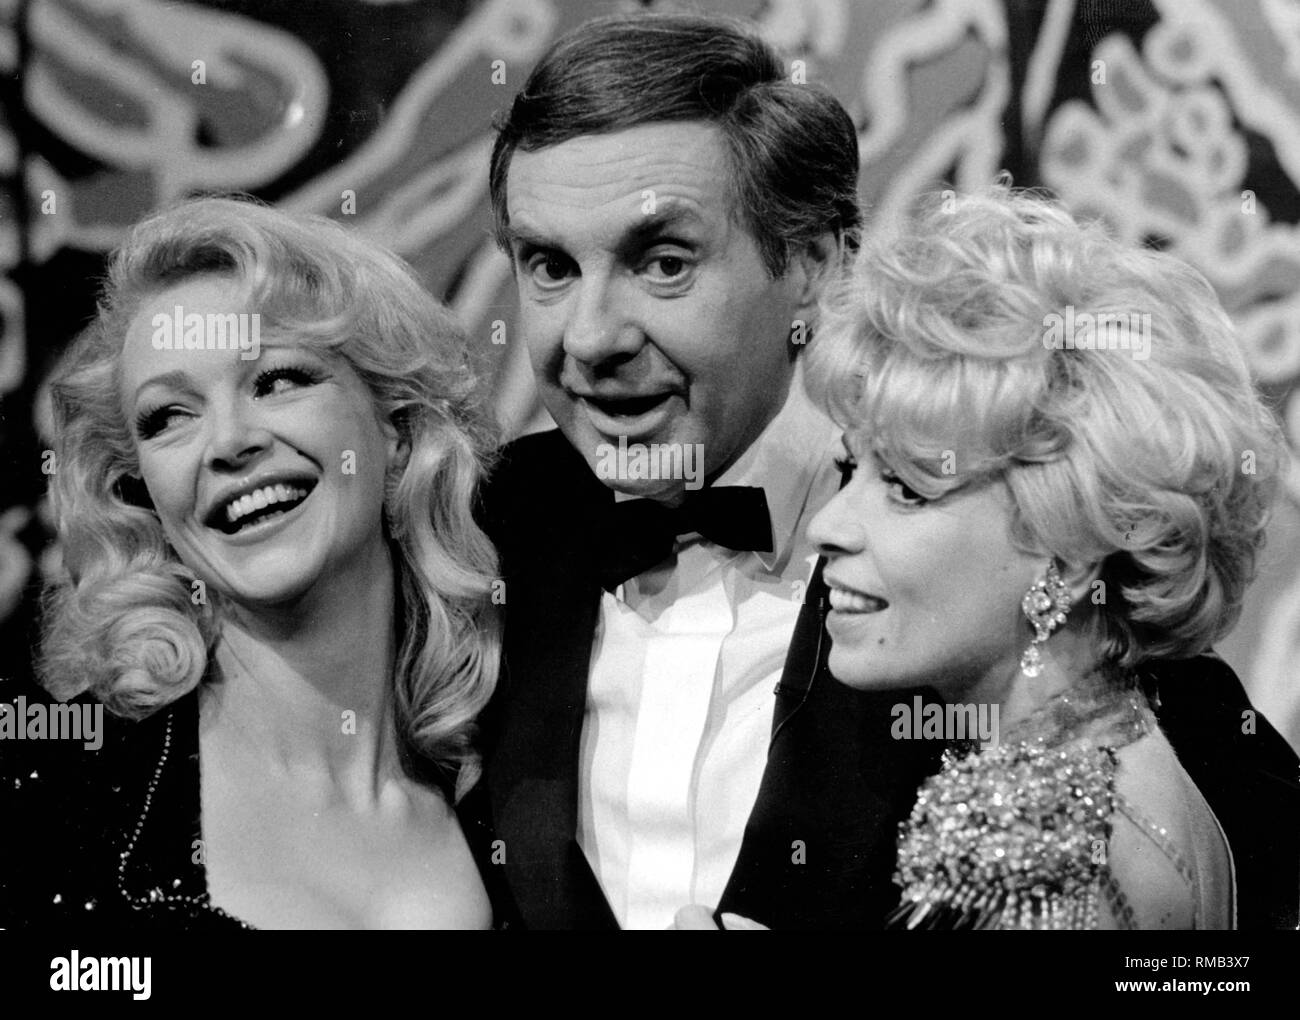 Harald Juhnke with his former partners Barbara Schoene (left) and Ingrid Steeger on the television show 'Willkommen im Club'. Stock Photo